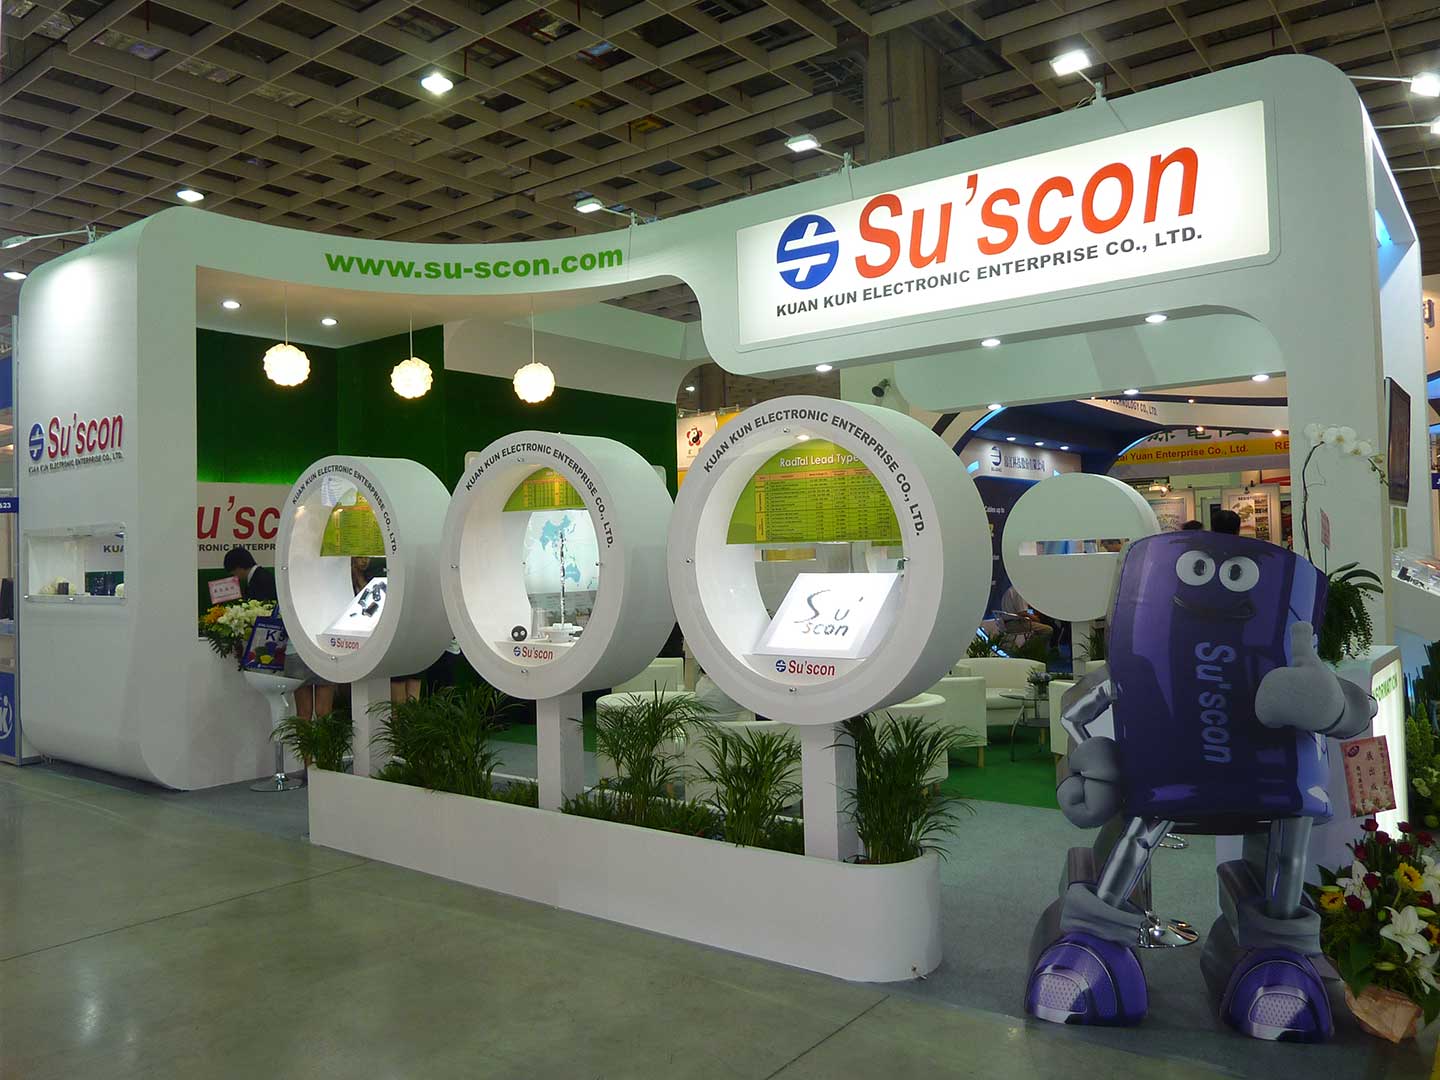 You are currently viewing SU’SCON INVITATION TO OUR BOOTH IN TAITRONICS 2011